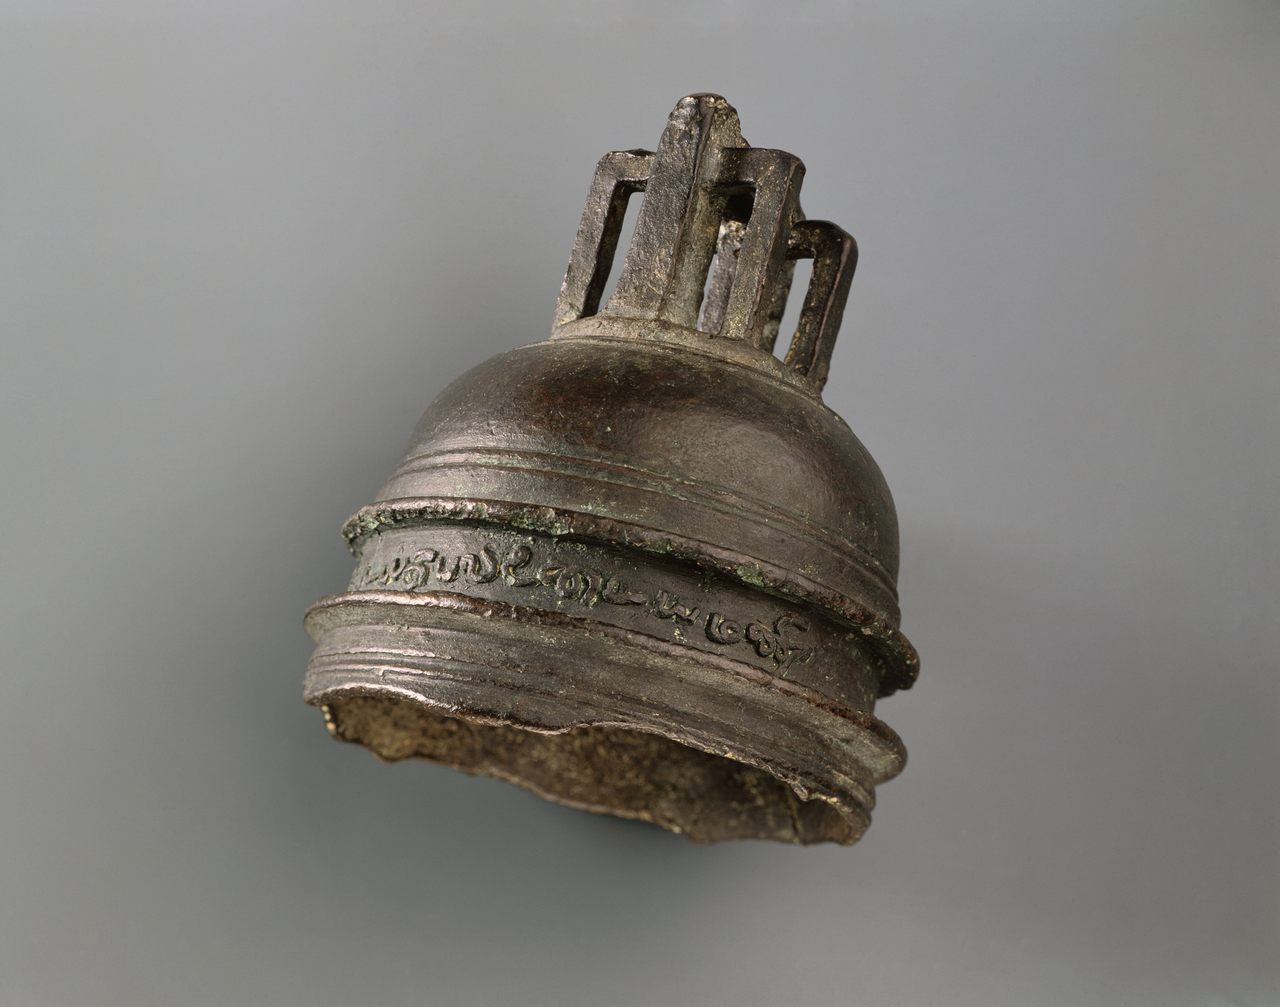 The Tamil Bell, the broken crown of a ship's bell embossed with Tamil script, has fascinated and perplexed scholars for more than a century.